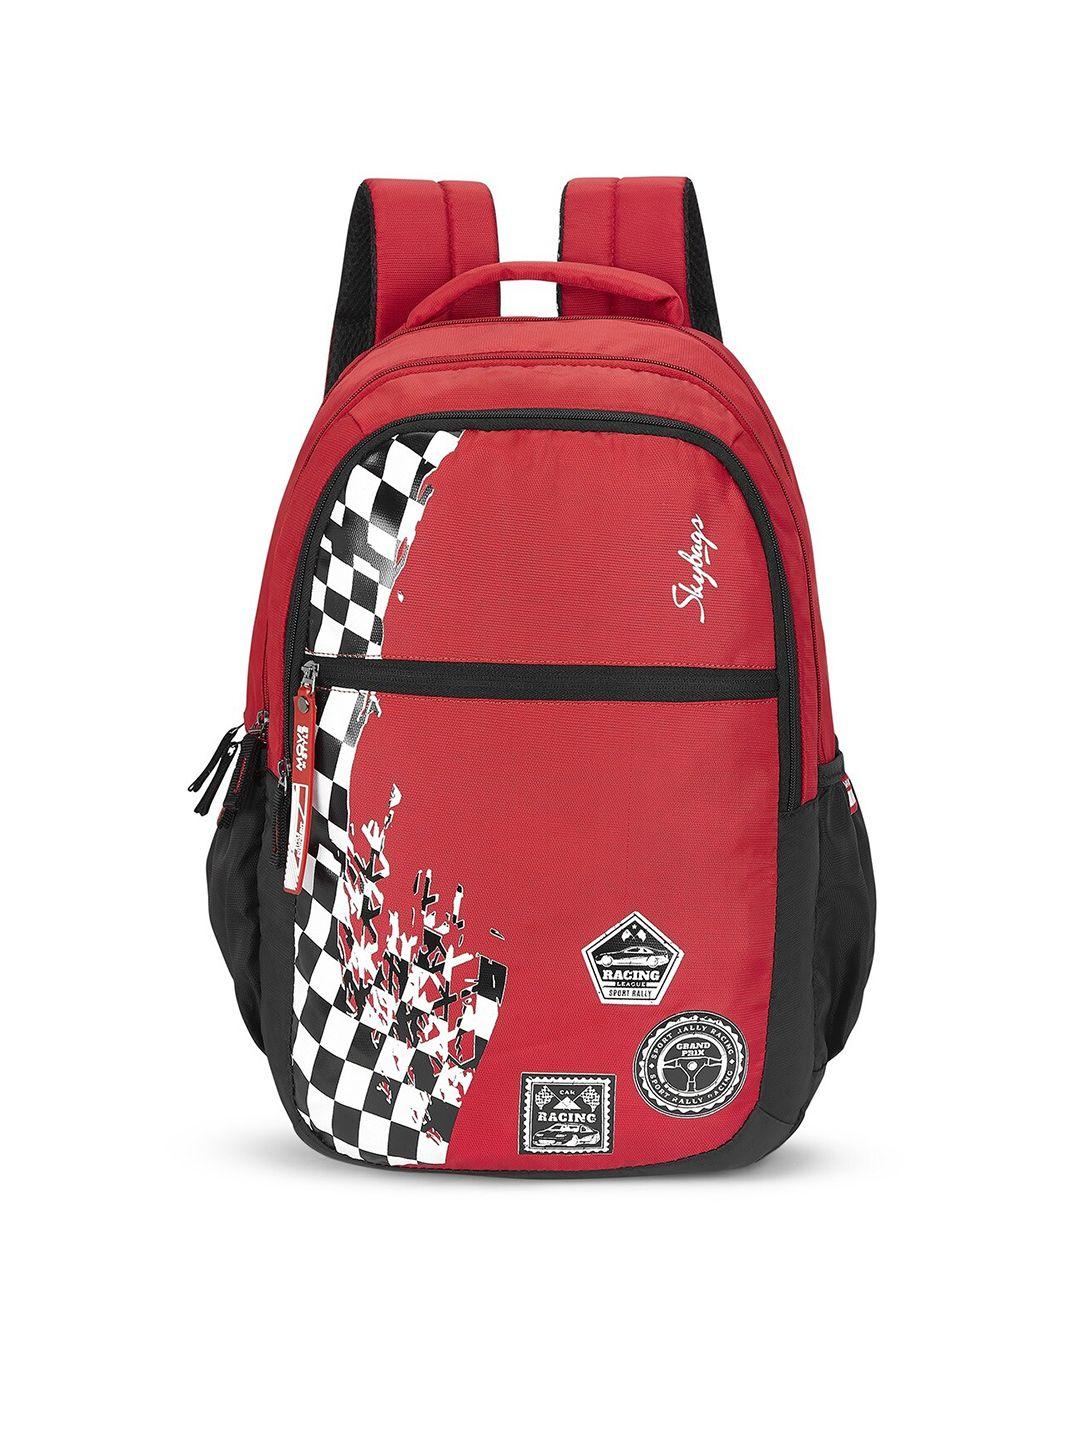 skybags-unisex-red-&-white-graphic-backpack